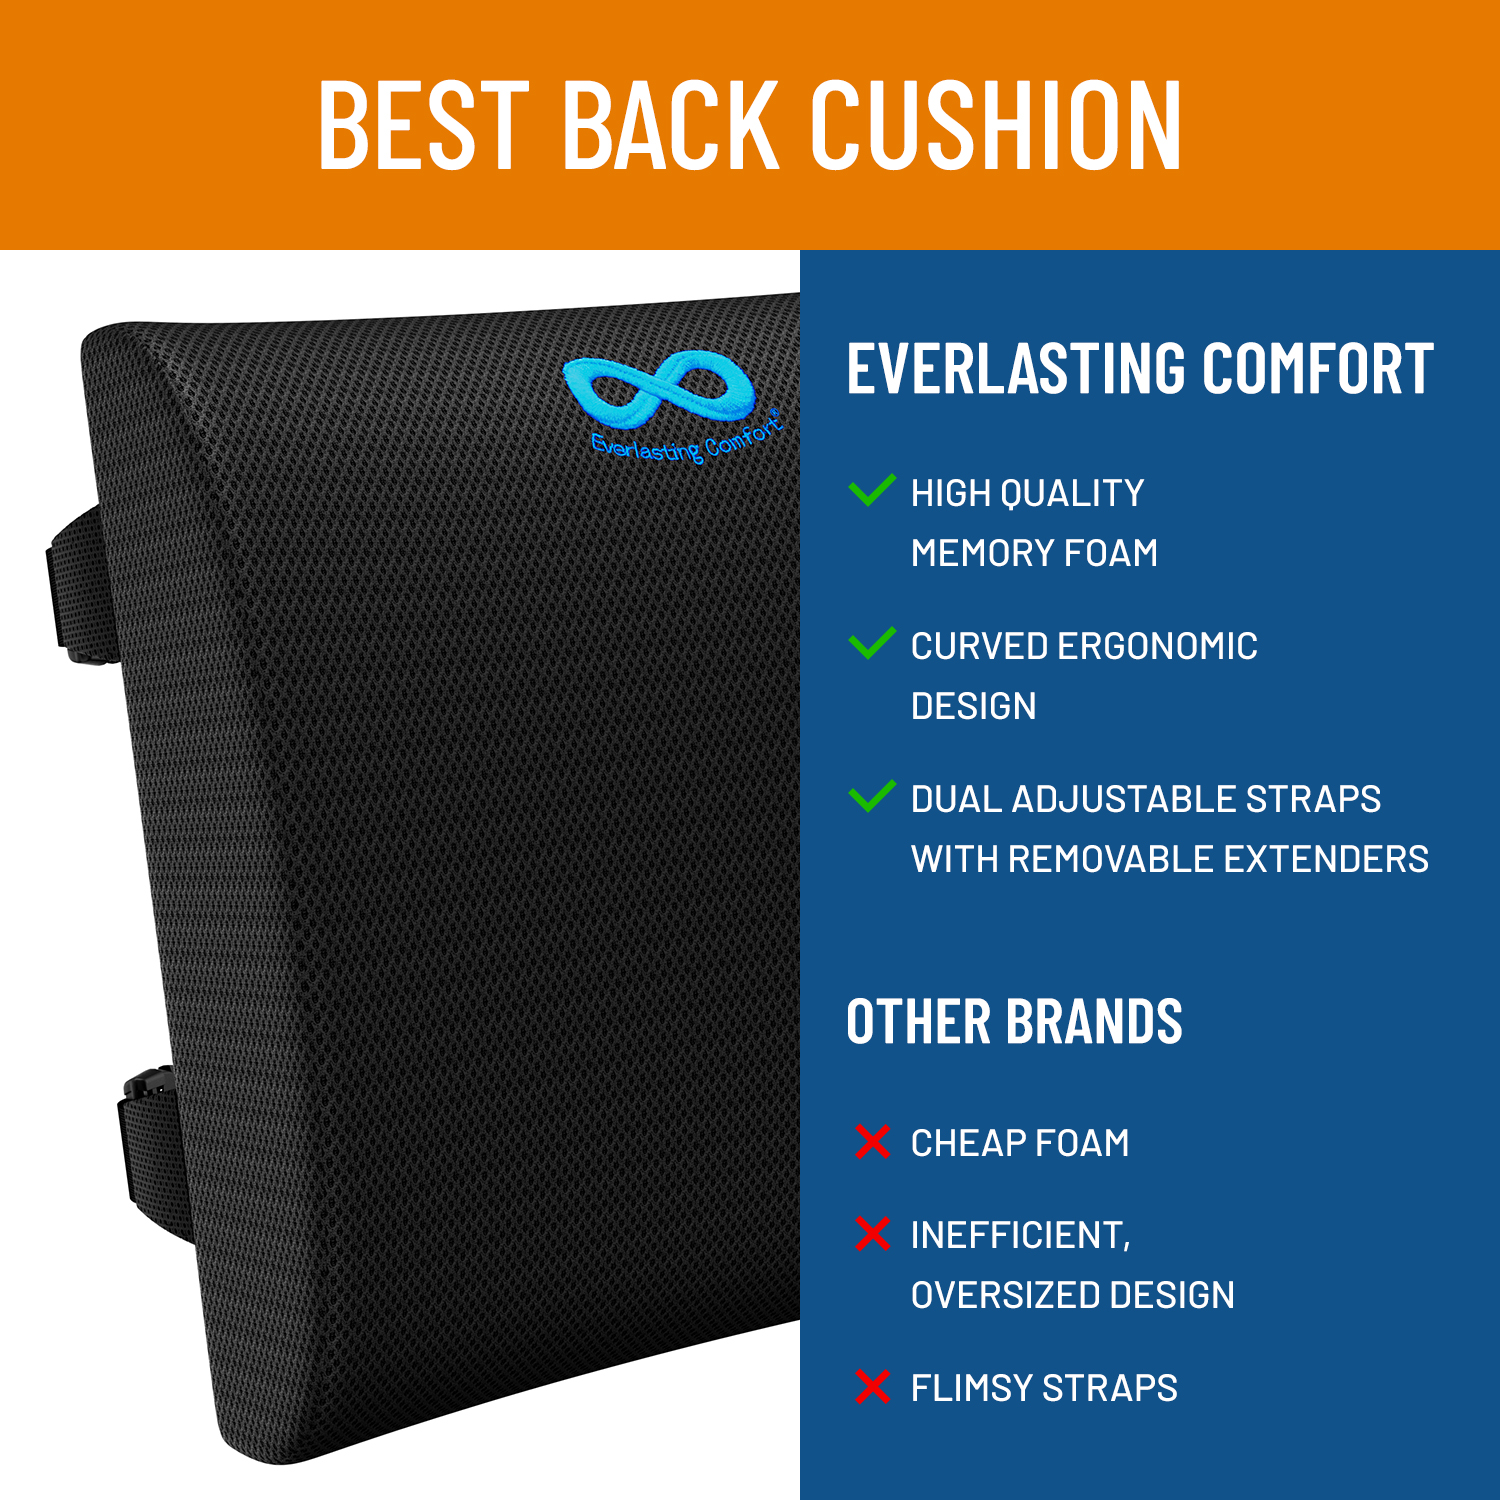 Everlasting Comfort Lumbar Support Pillow for Office Chair Memory Foam Back Cushion, Black - image 2 of 9